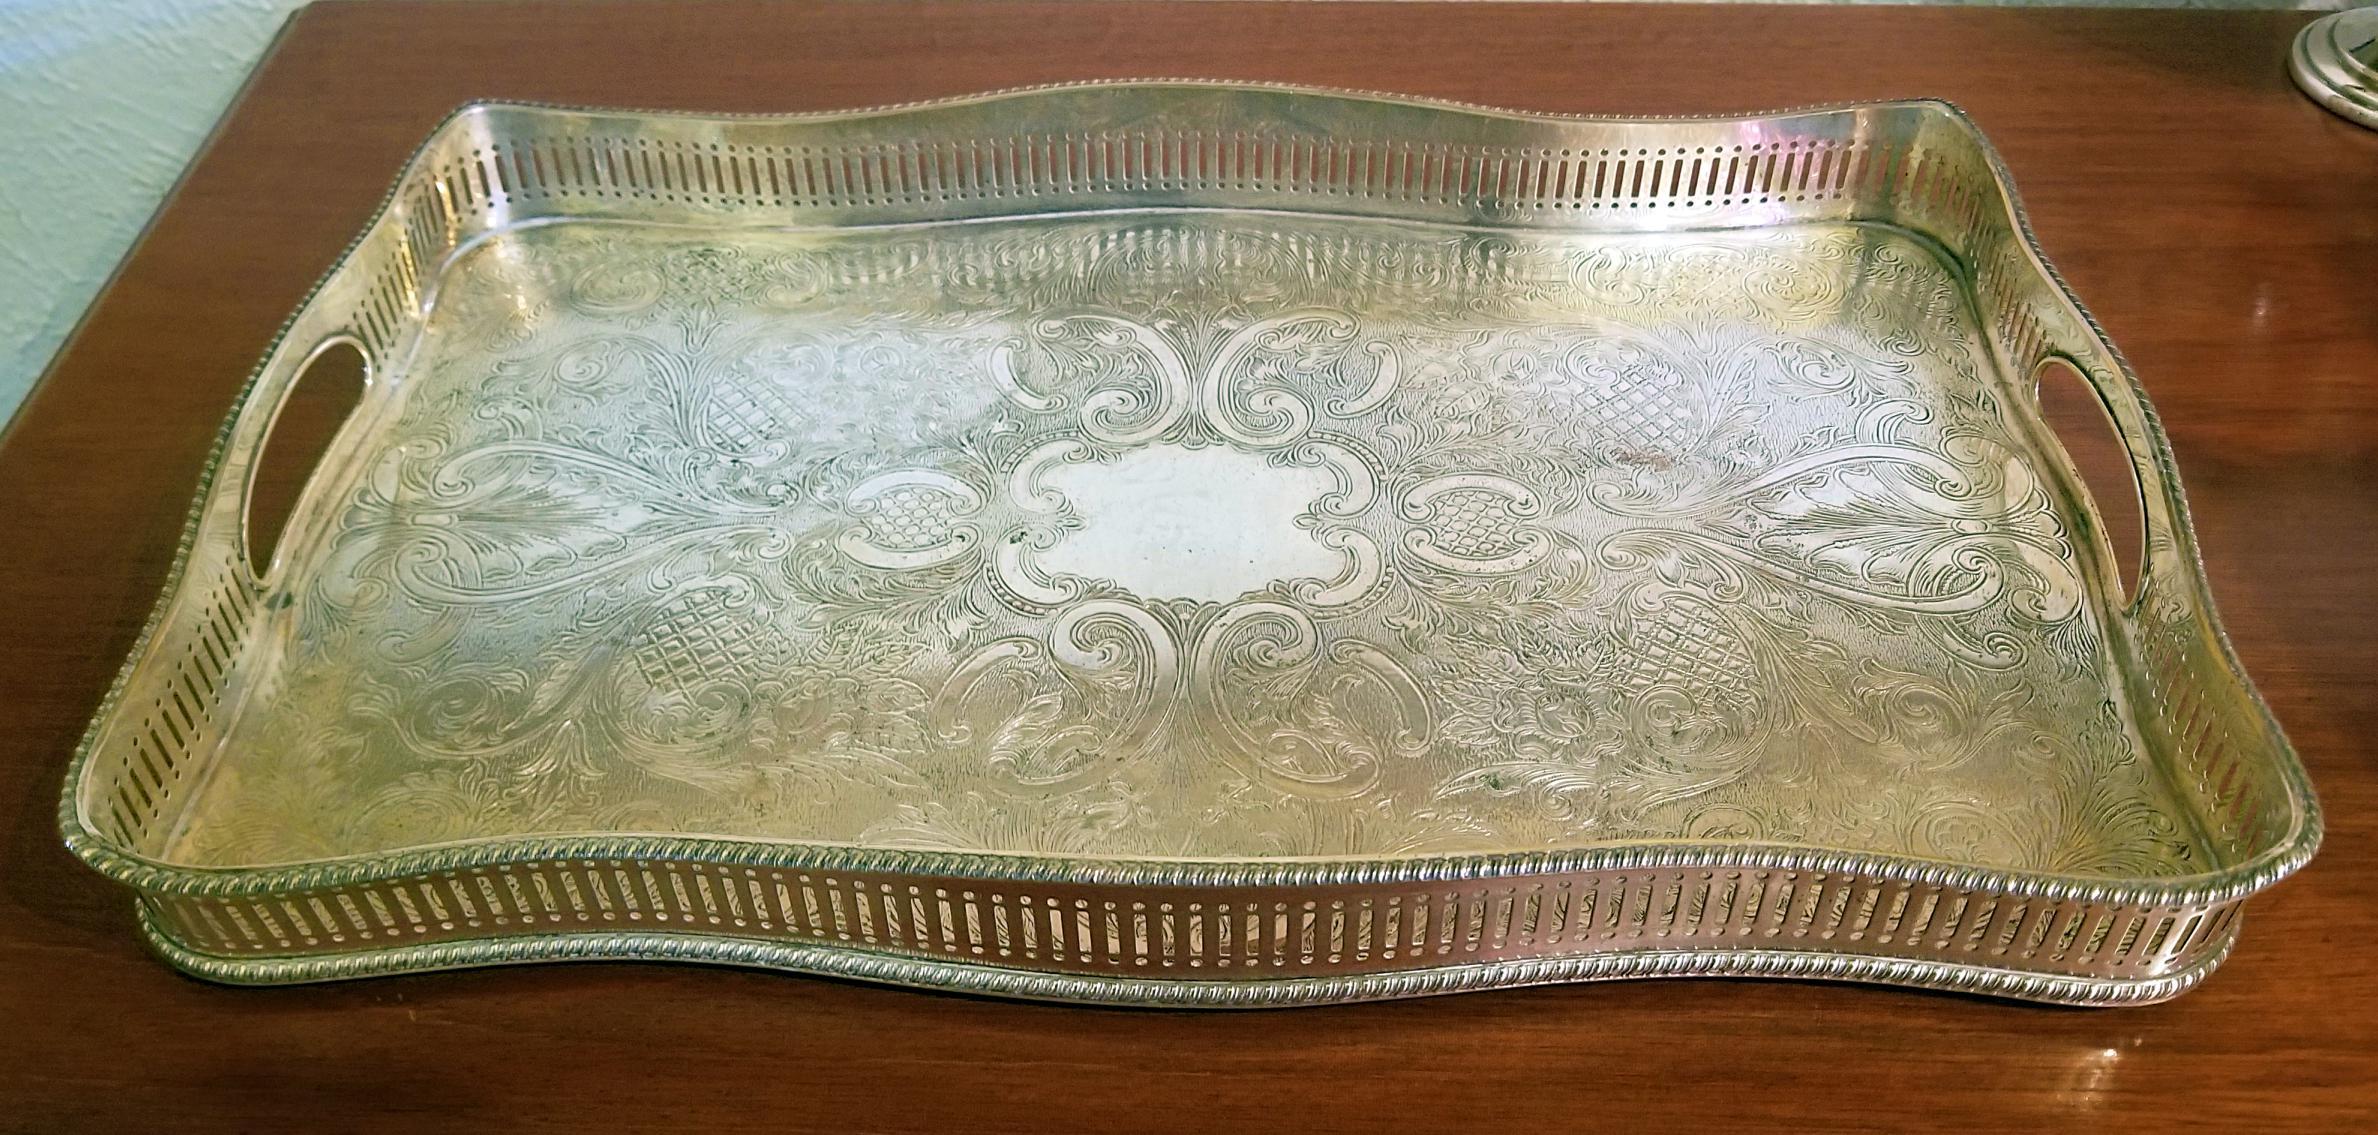 19th Century British Old Sheffield Plated Silver Heavily Engraved Serving Tray 2